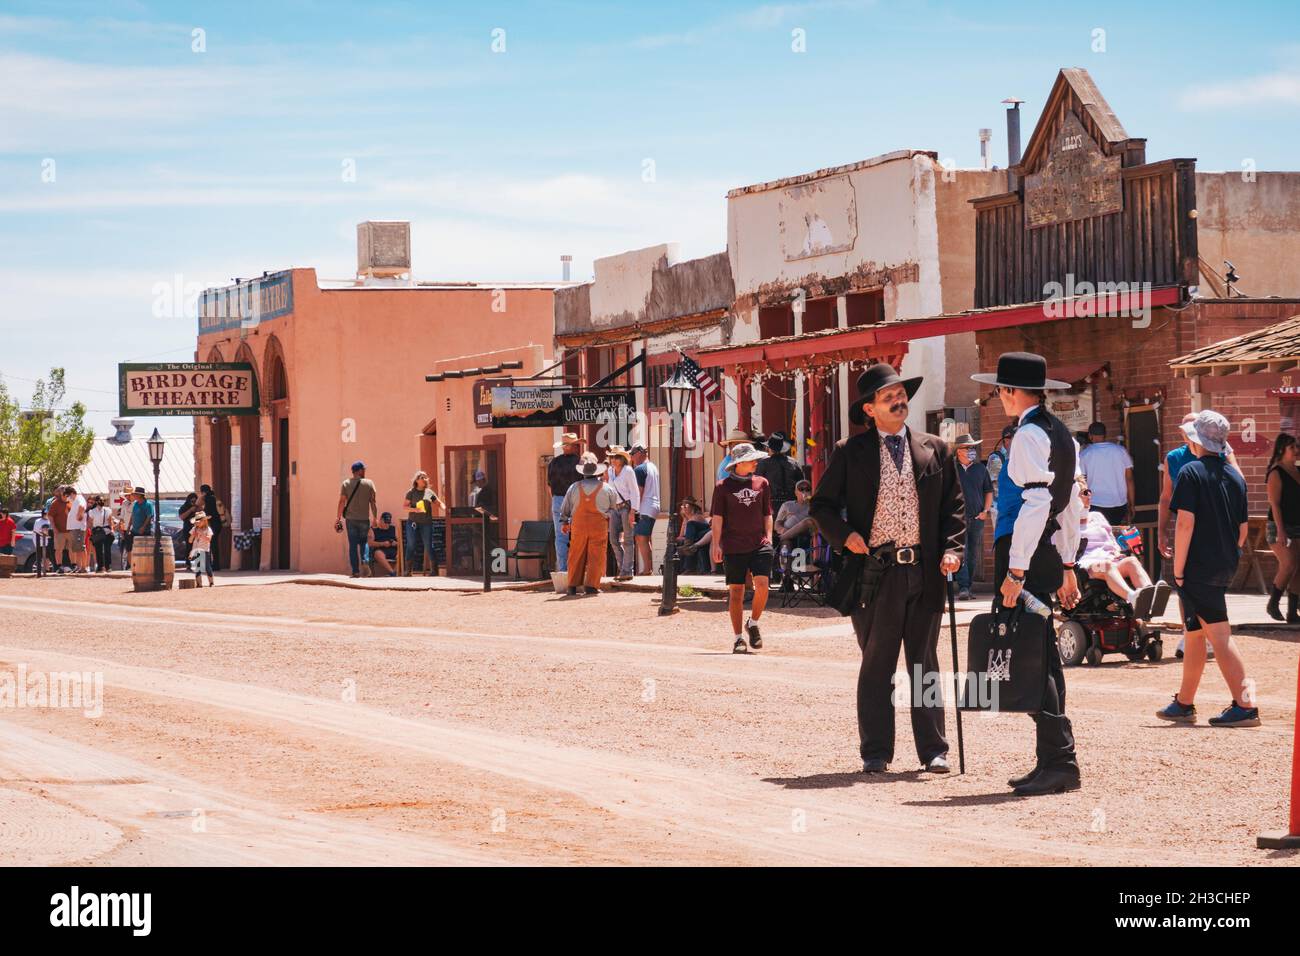 The historic town of Tombstone, AZ, during the annual Rose Festival, featuring many local residents and businesses dressed in Old West attire Stock Photo